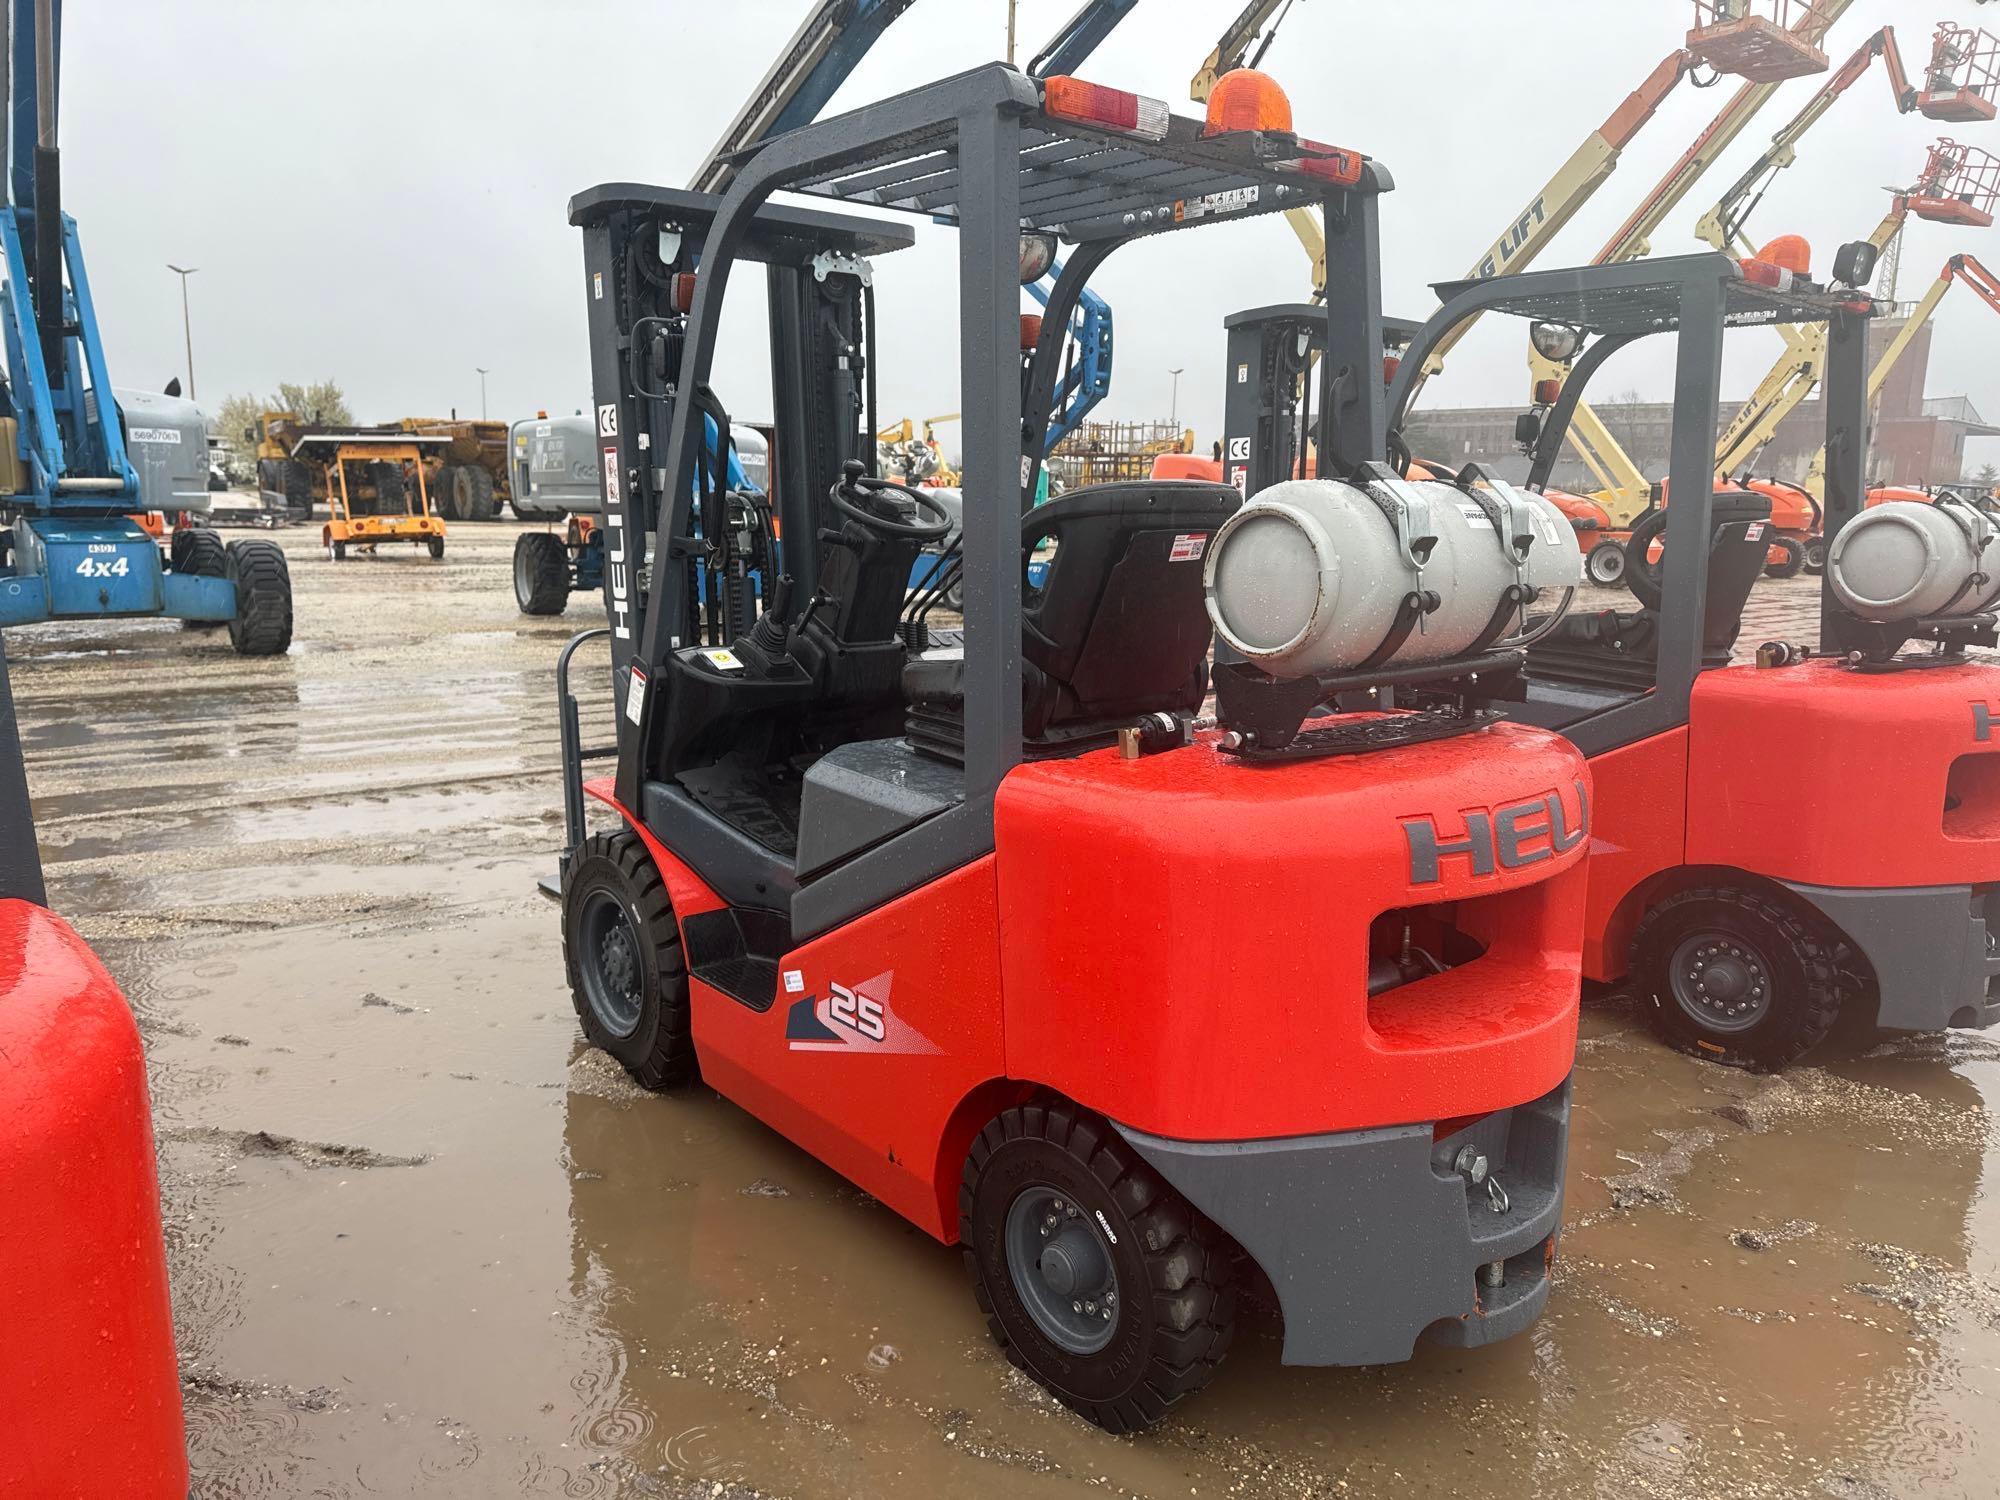 NEW HELI CPYD25 FORKLIFT SN:A1335 powered by LP engine, equipped with OROPS, 5,000lb lift capacity,